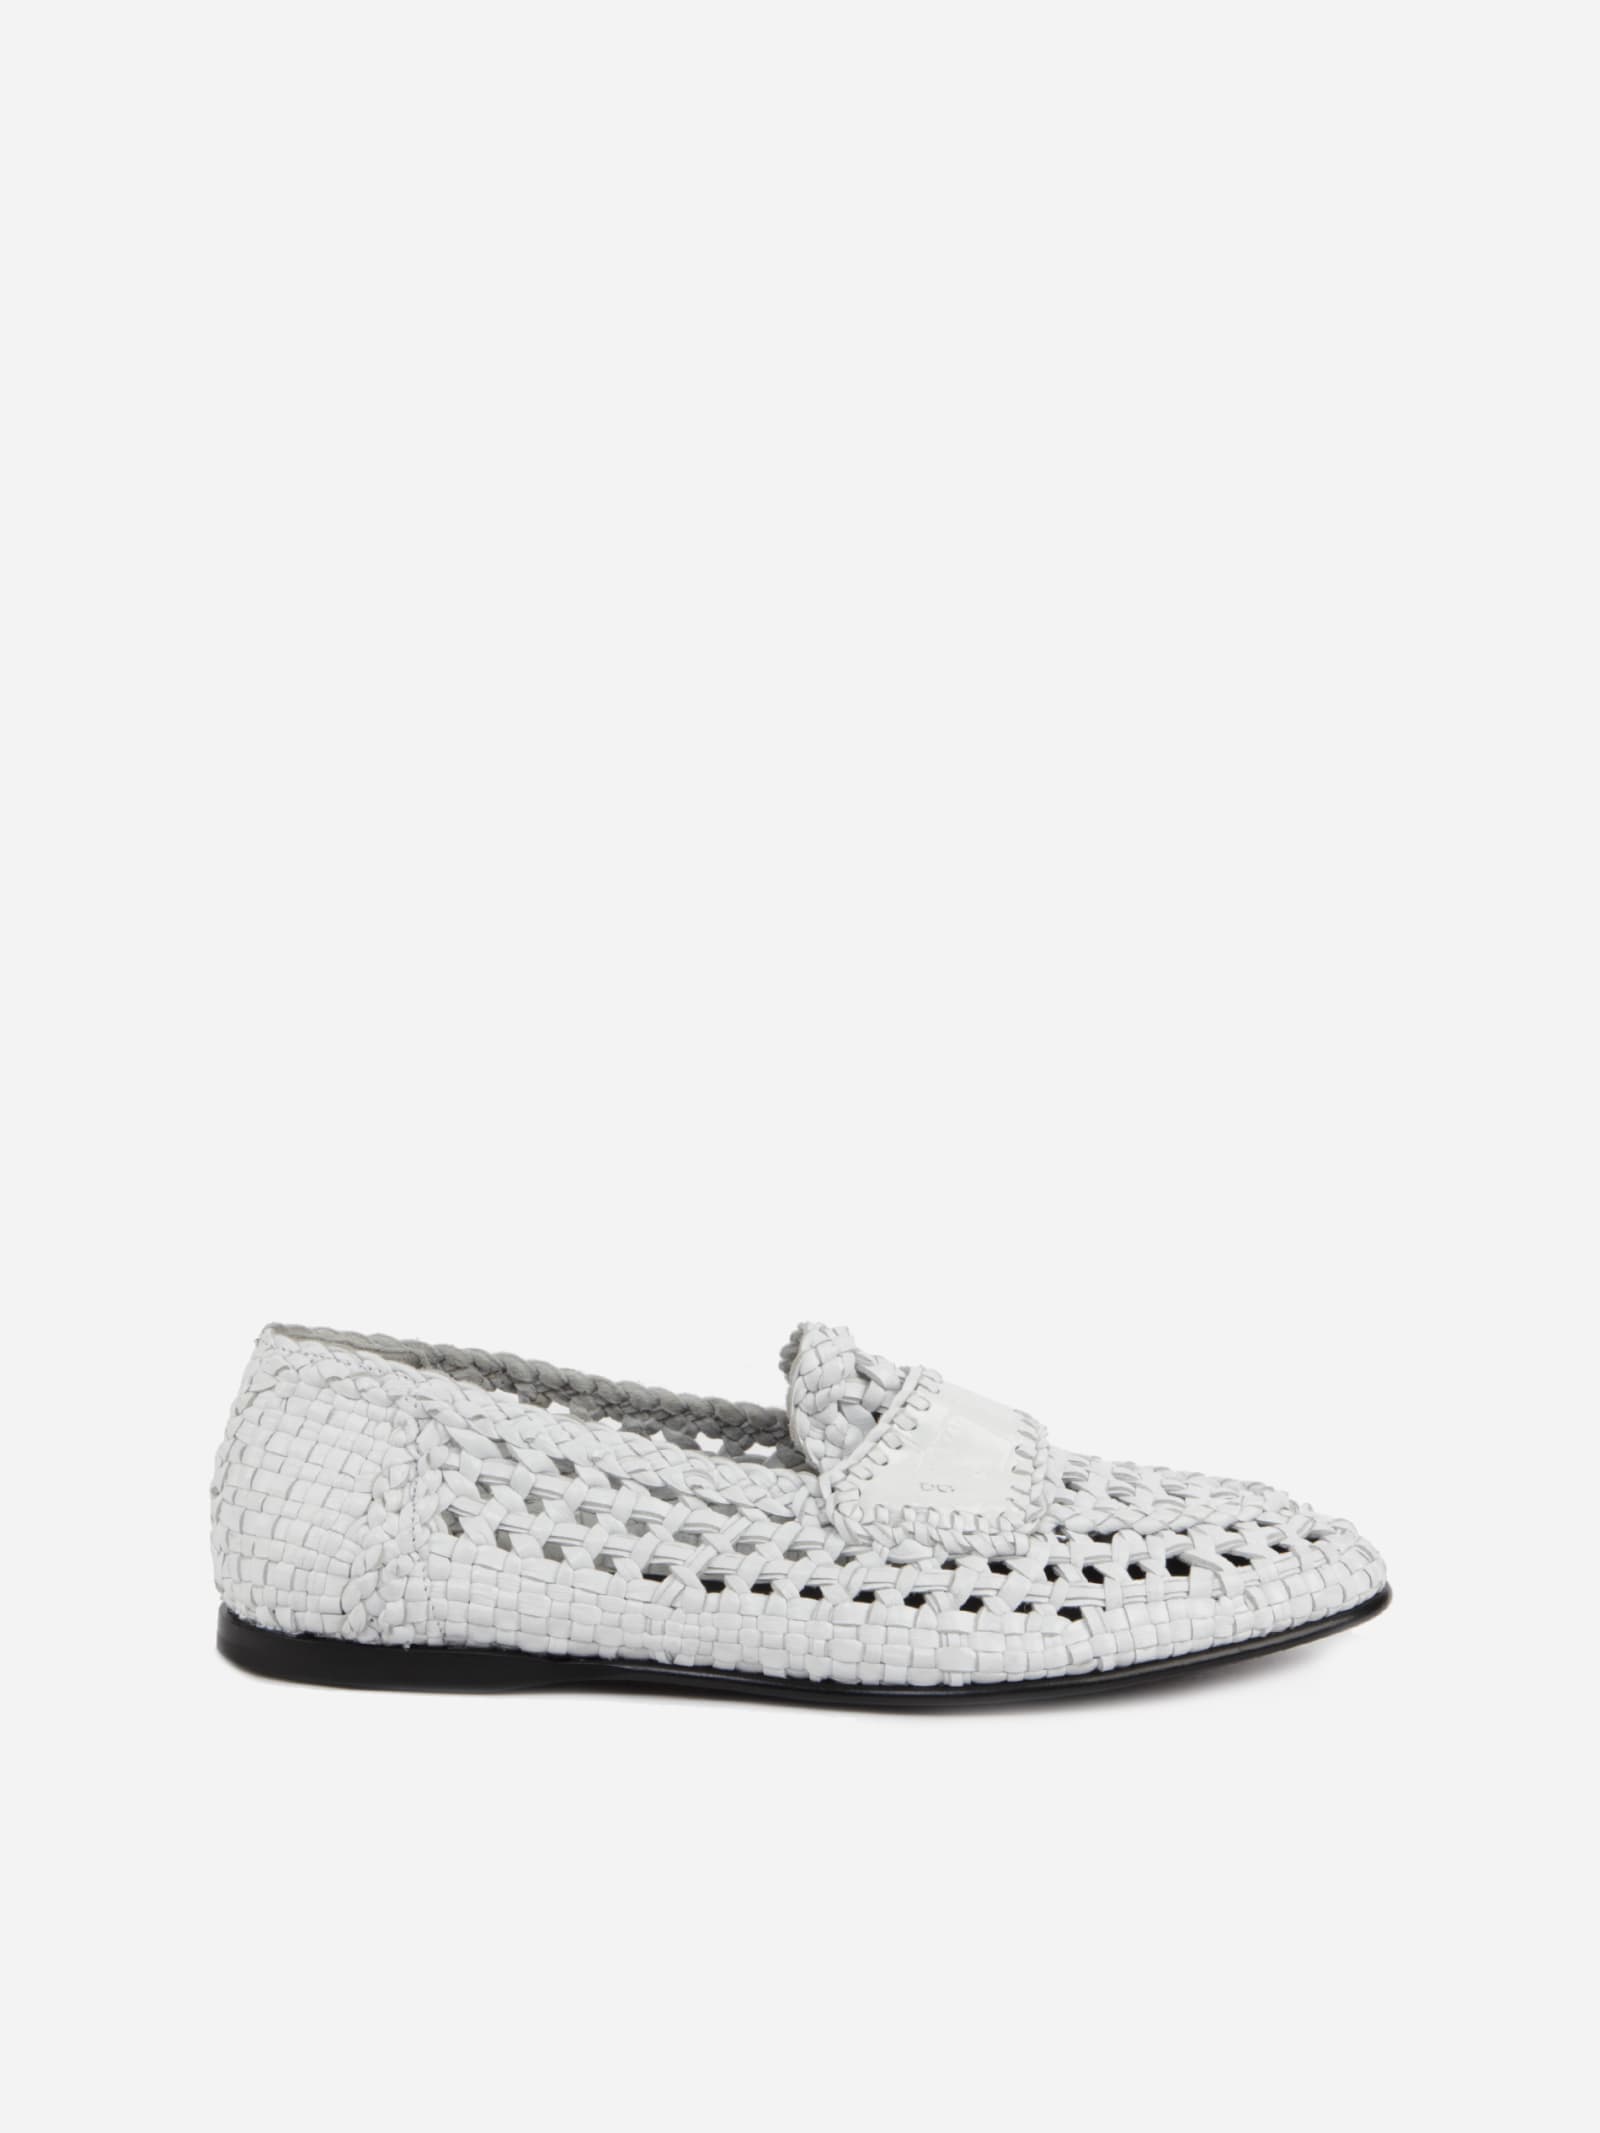 DOLCE & GABBANA SLIP-ONS MADE OF LEATHER WITH A WOVEN PATTERN,A50378 AO72480001